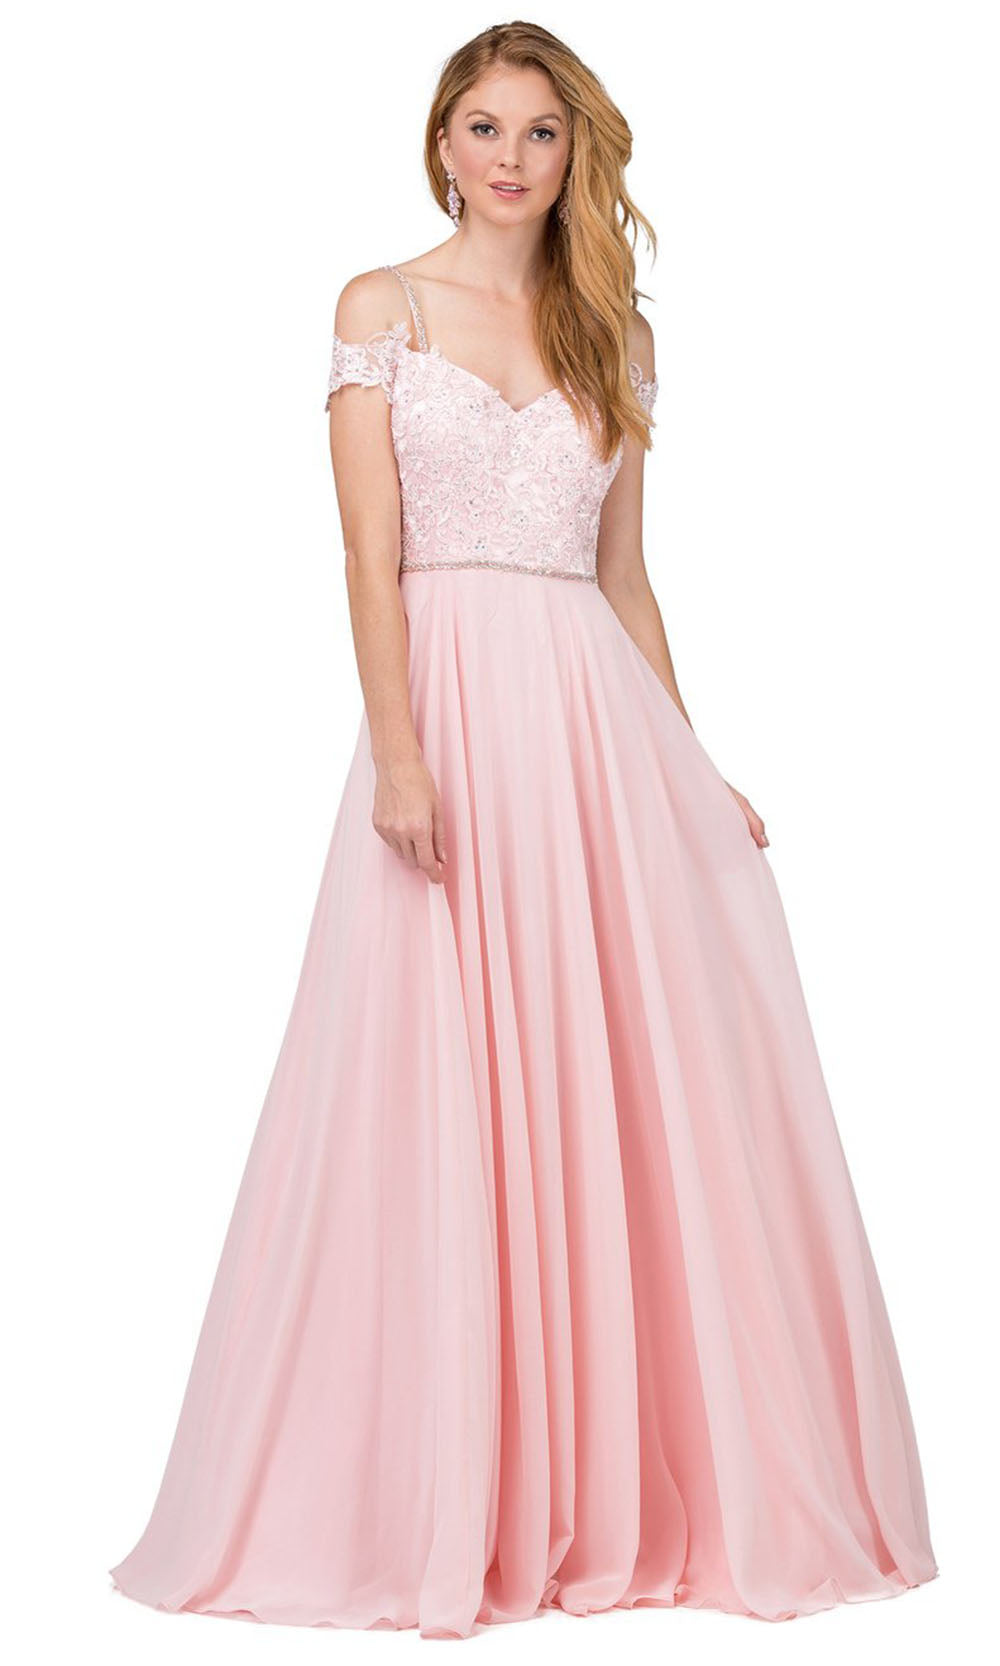 Dancing Queen - 2327 Embroidered Off Shoulder A-Line Dress In Pink